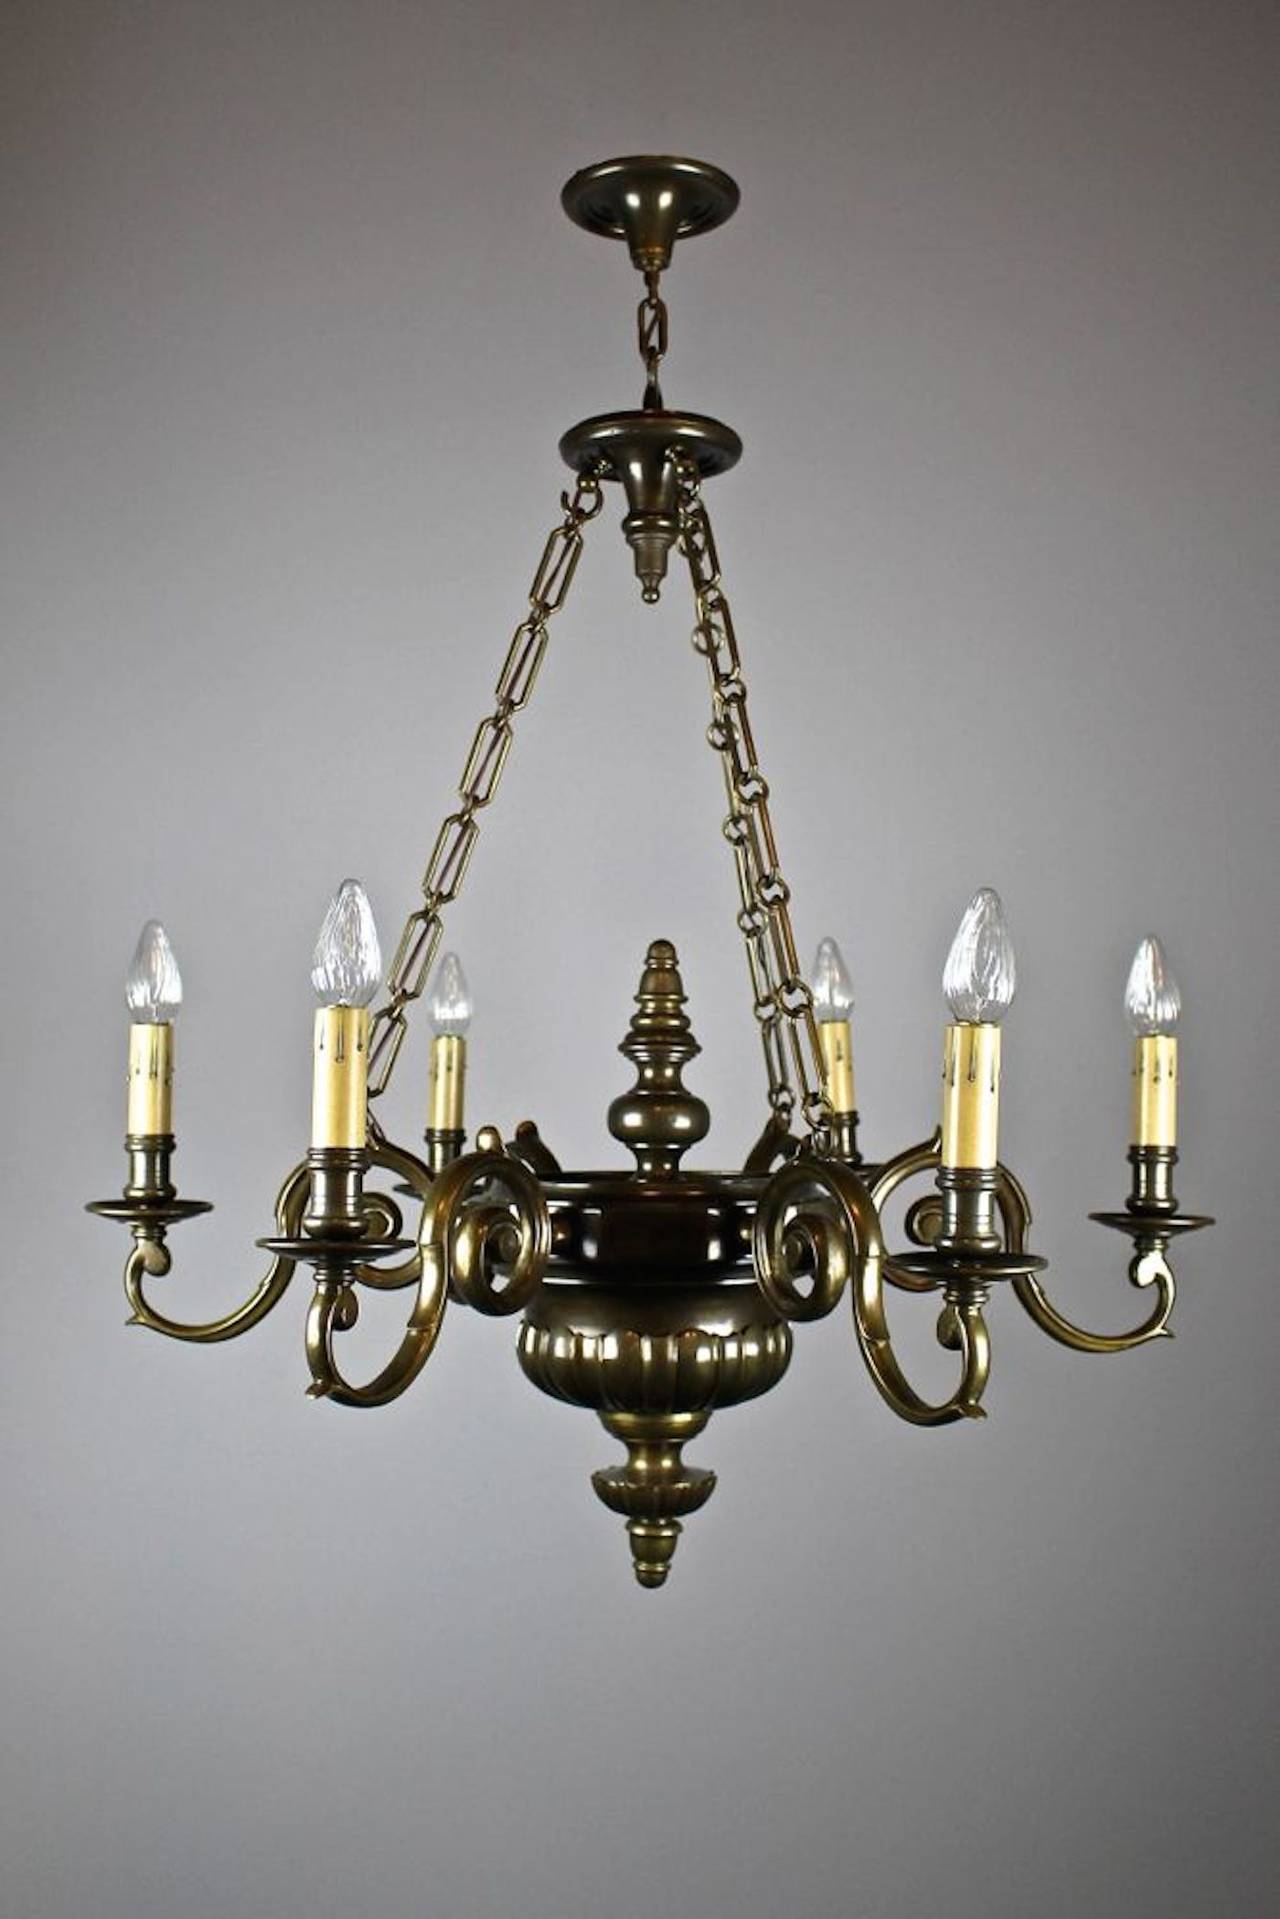 Circa 1910. This is a super high-quality Edwardian chandelier in the Sheffield style, with electrified candle-tapers Fully cleaned, rewired, restored, and ready to hang. 
Measurements: 43" H X 35" W. SKU: DF1213.